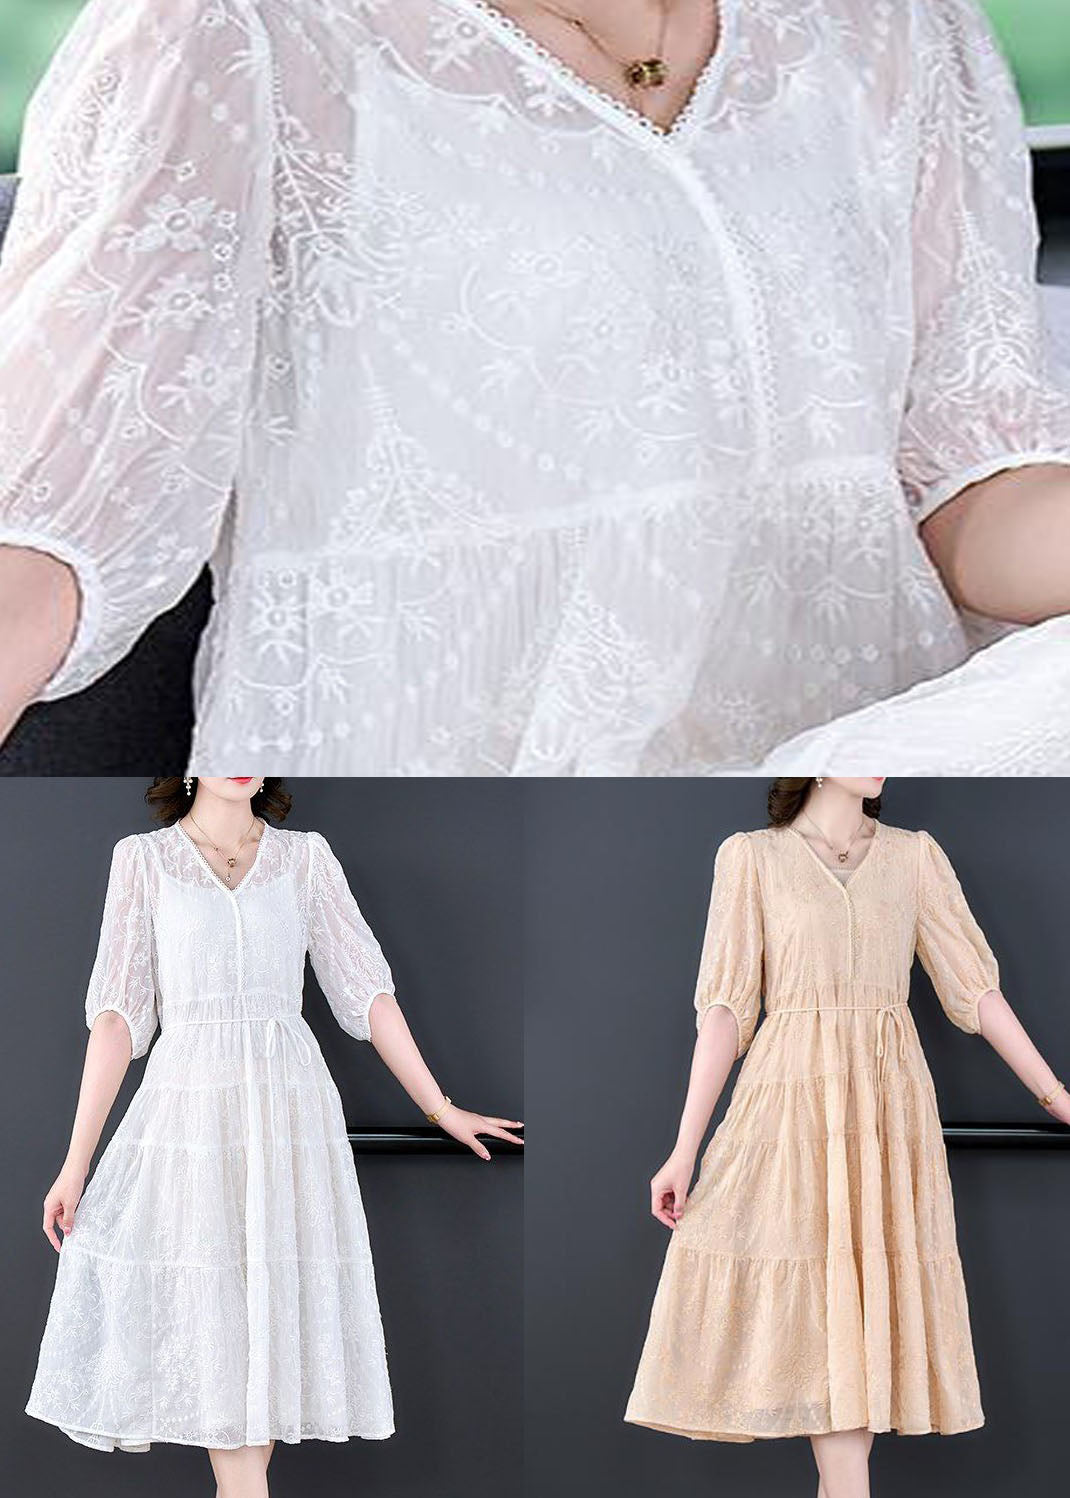 Boho White V Neck Embroideried Patchwork Silk Two Pieces Set Summer LY4610 - fabuloryshop